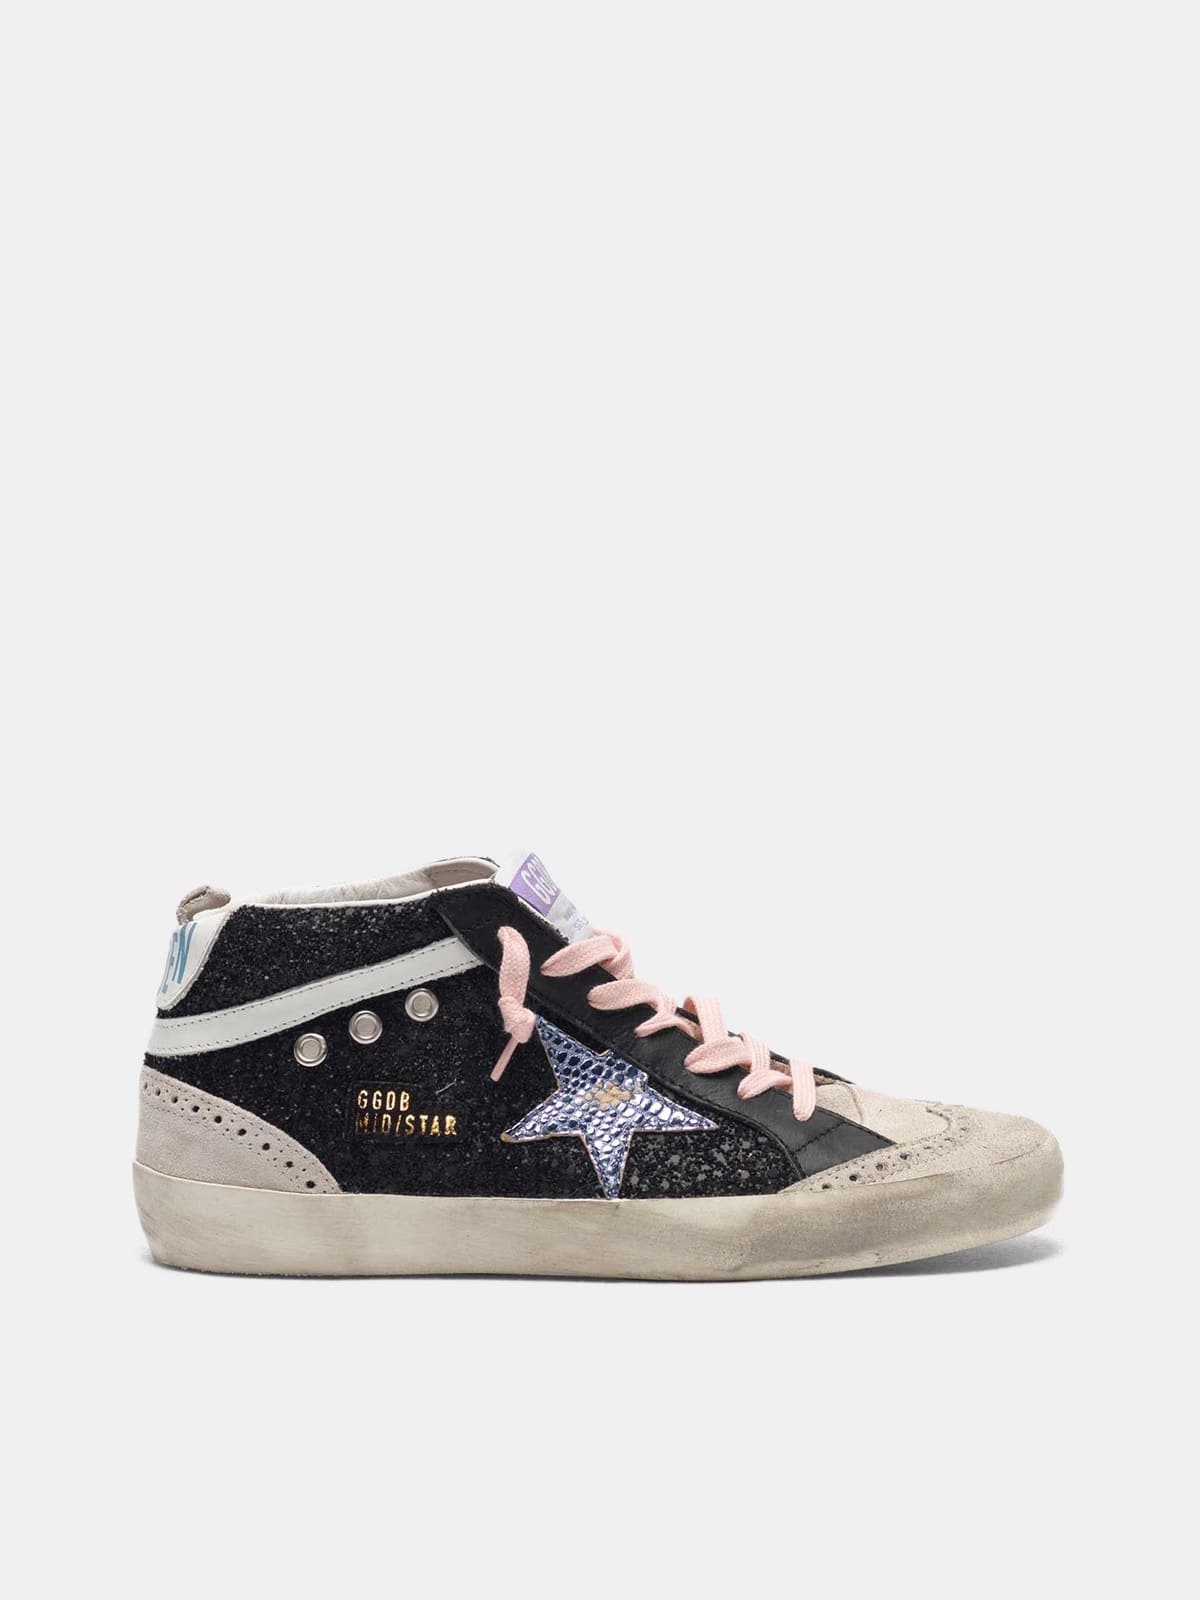 golden goose glitter with Mid-Star sneakers and Black iridescent star